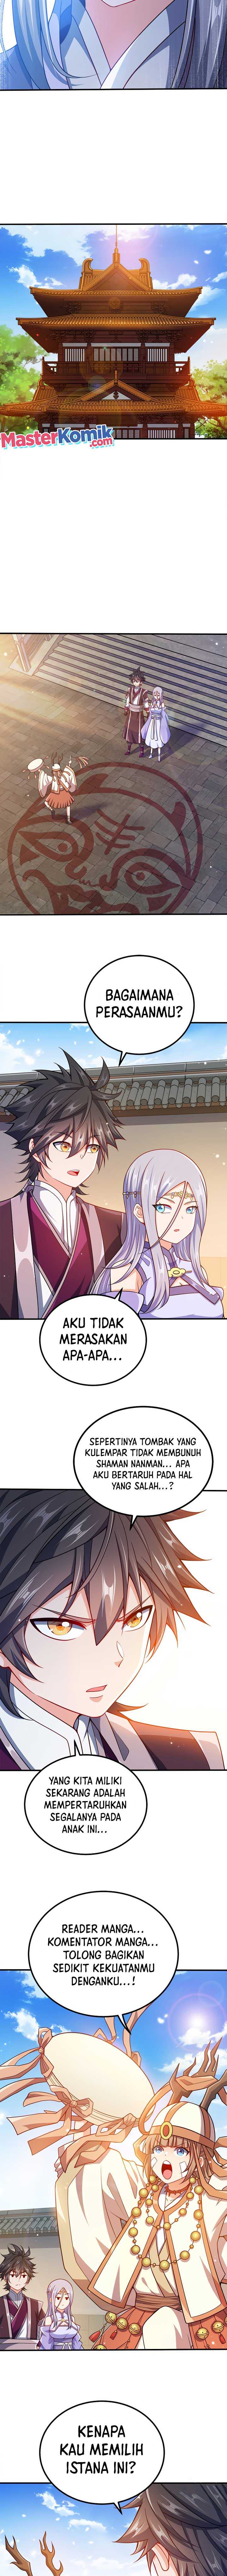 My Lady Is Actually the Empress? Chapter 85